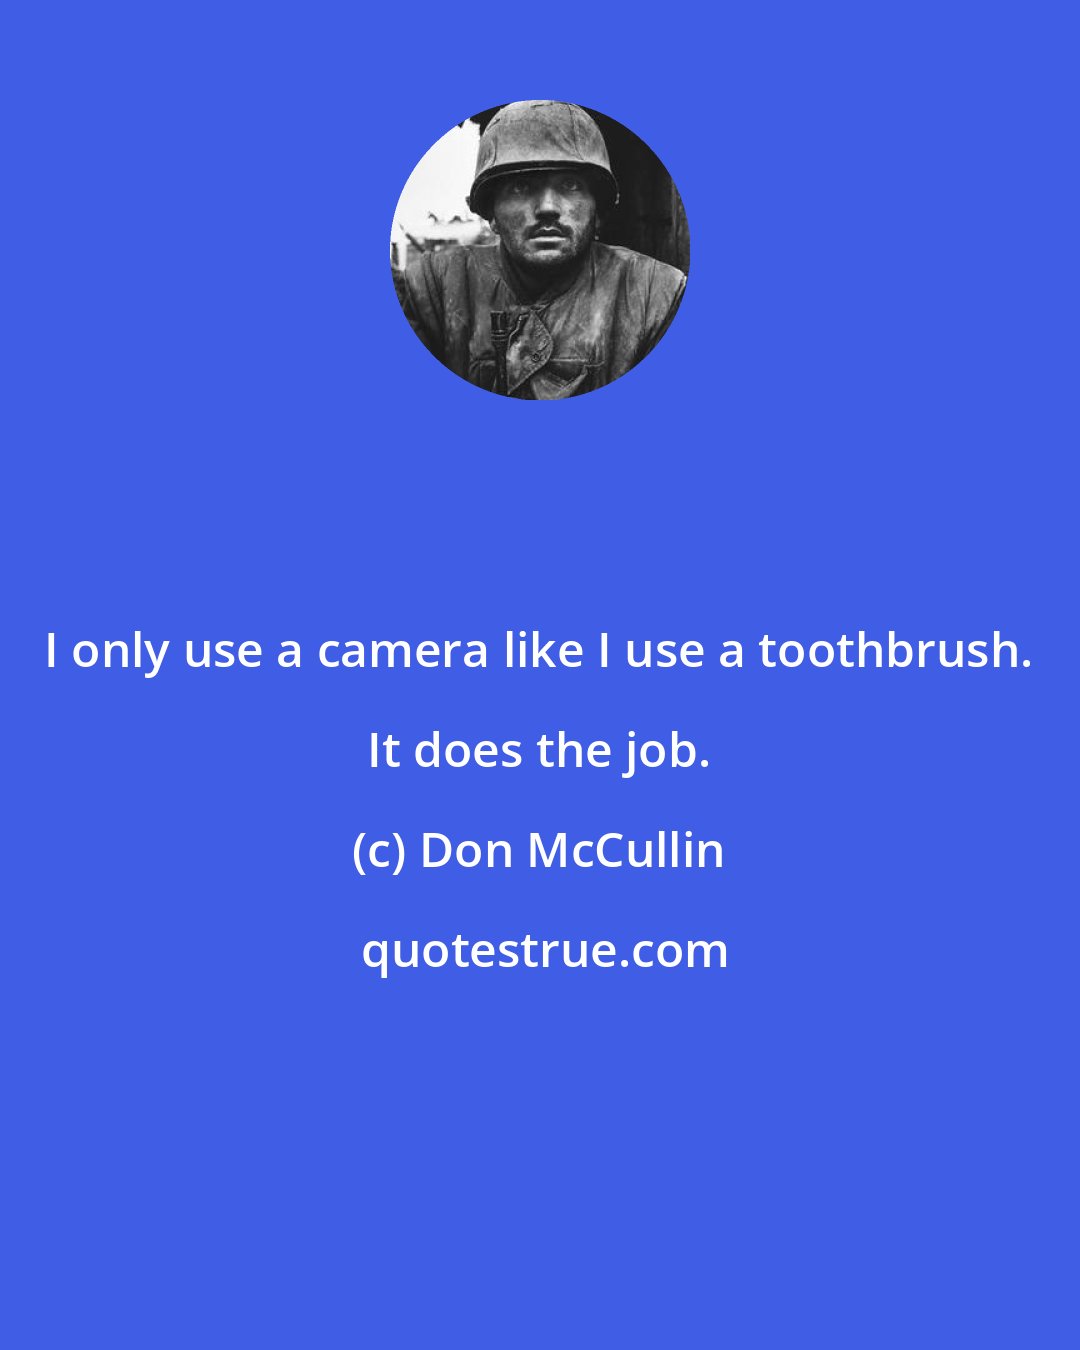 Don McCullin: I only use a camera like I use a toothbrush. It does the job.